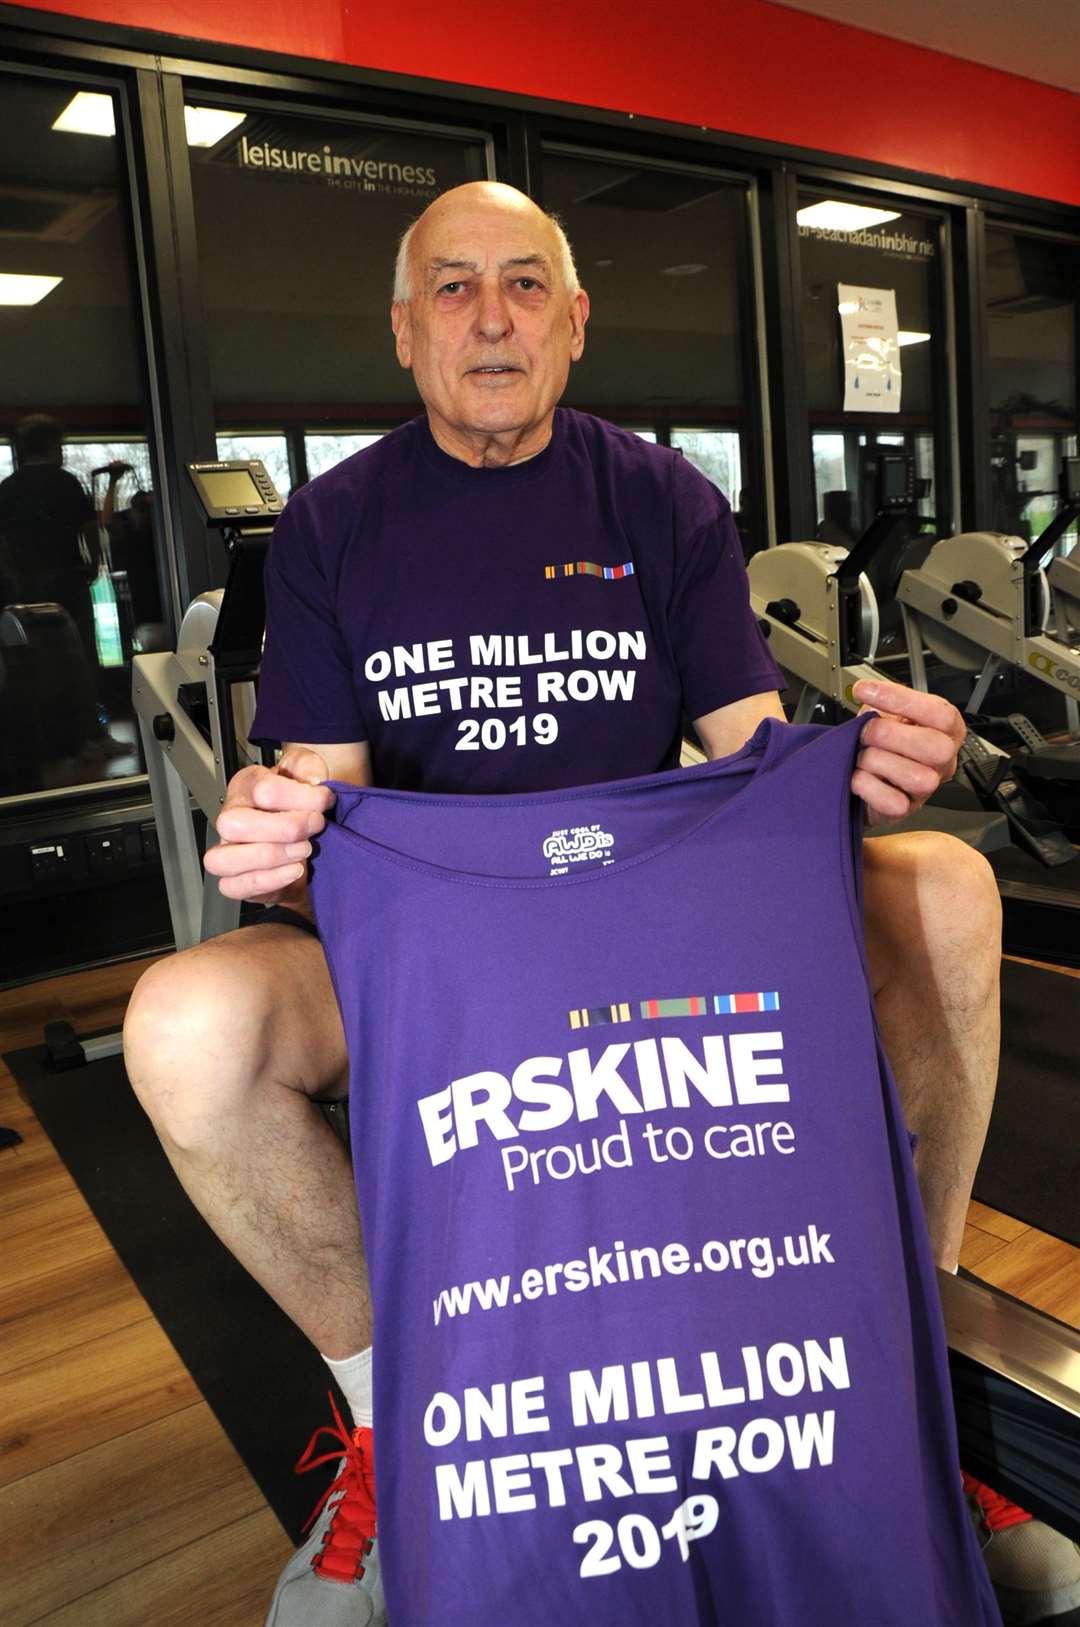 John Baillie who is rowing in aid of the Erskine charity.